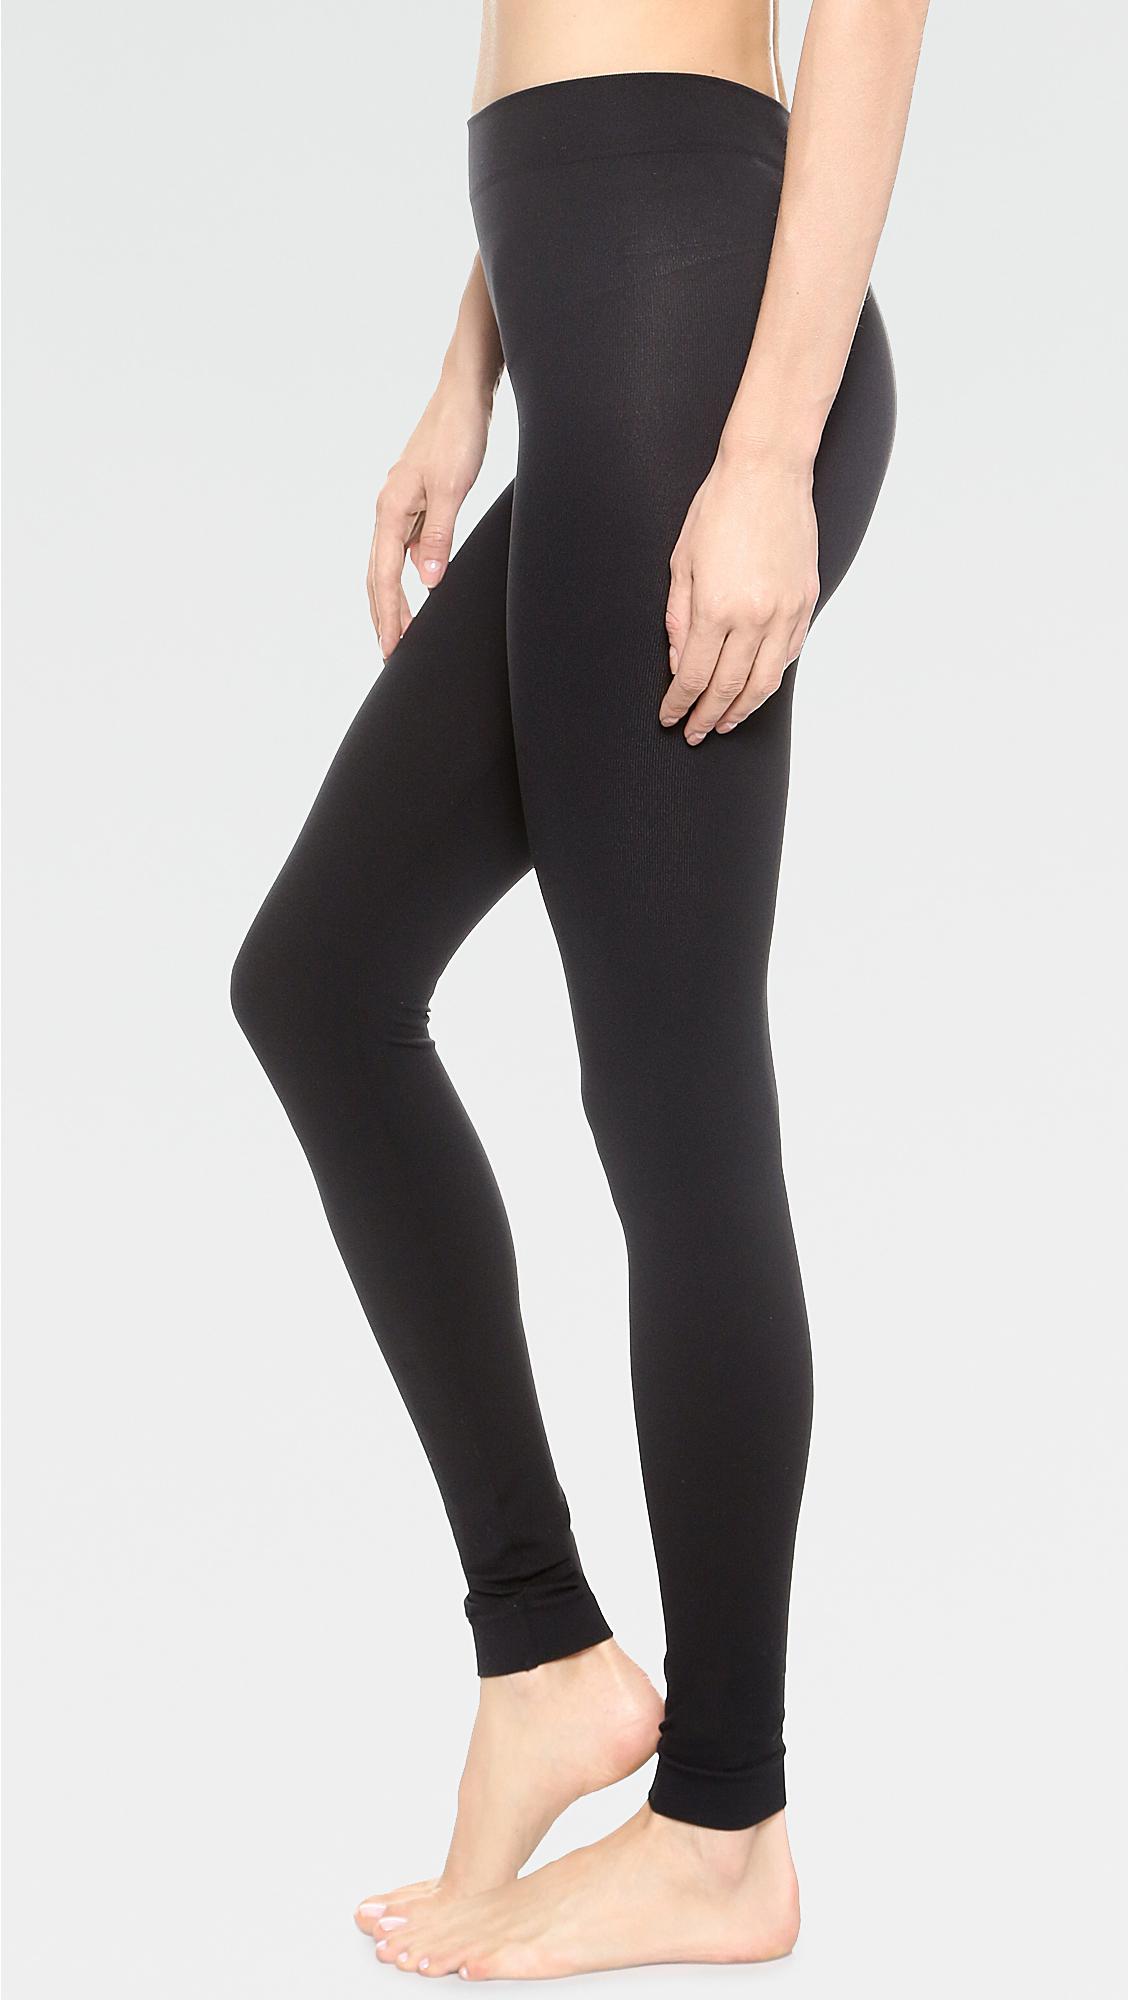 Lyst - Wolford Velvet 100 Leg Support Footless Tights in Black